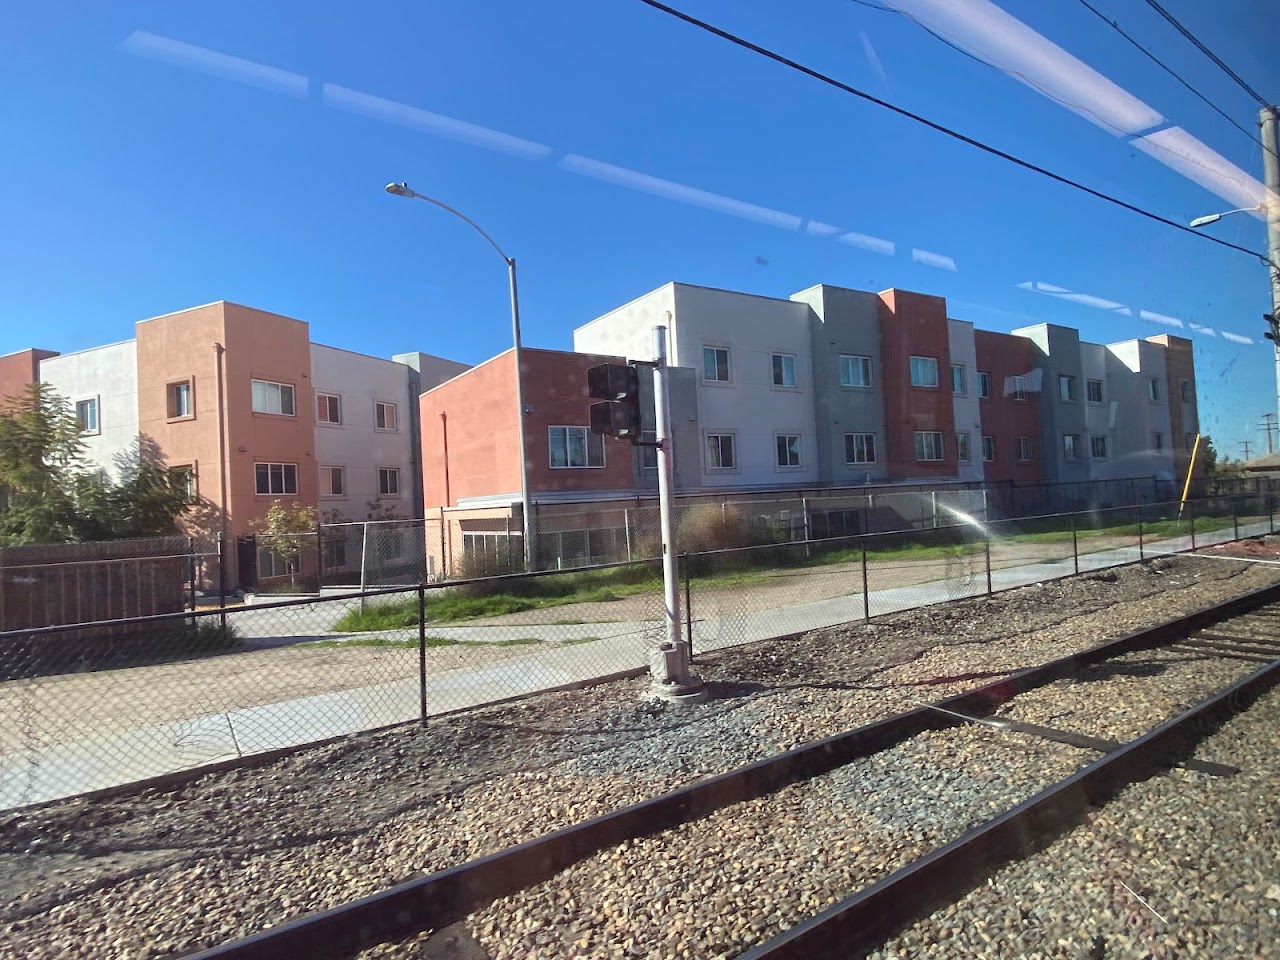 Photo of PASEO LA PAZ. Affordable housing located at 160 W. SEAWARD AVENUE SAN DIEGO, CA 92173